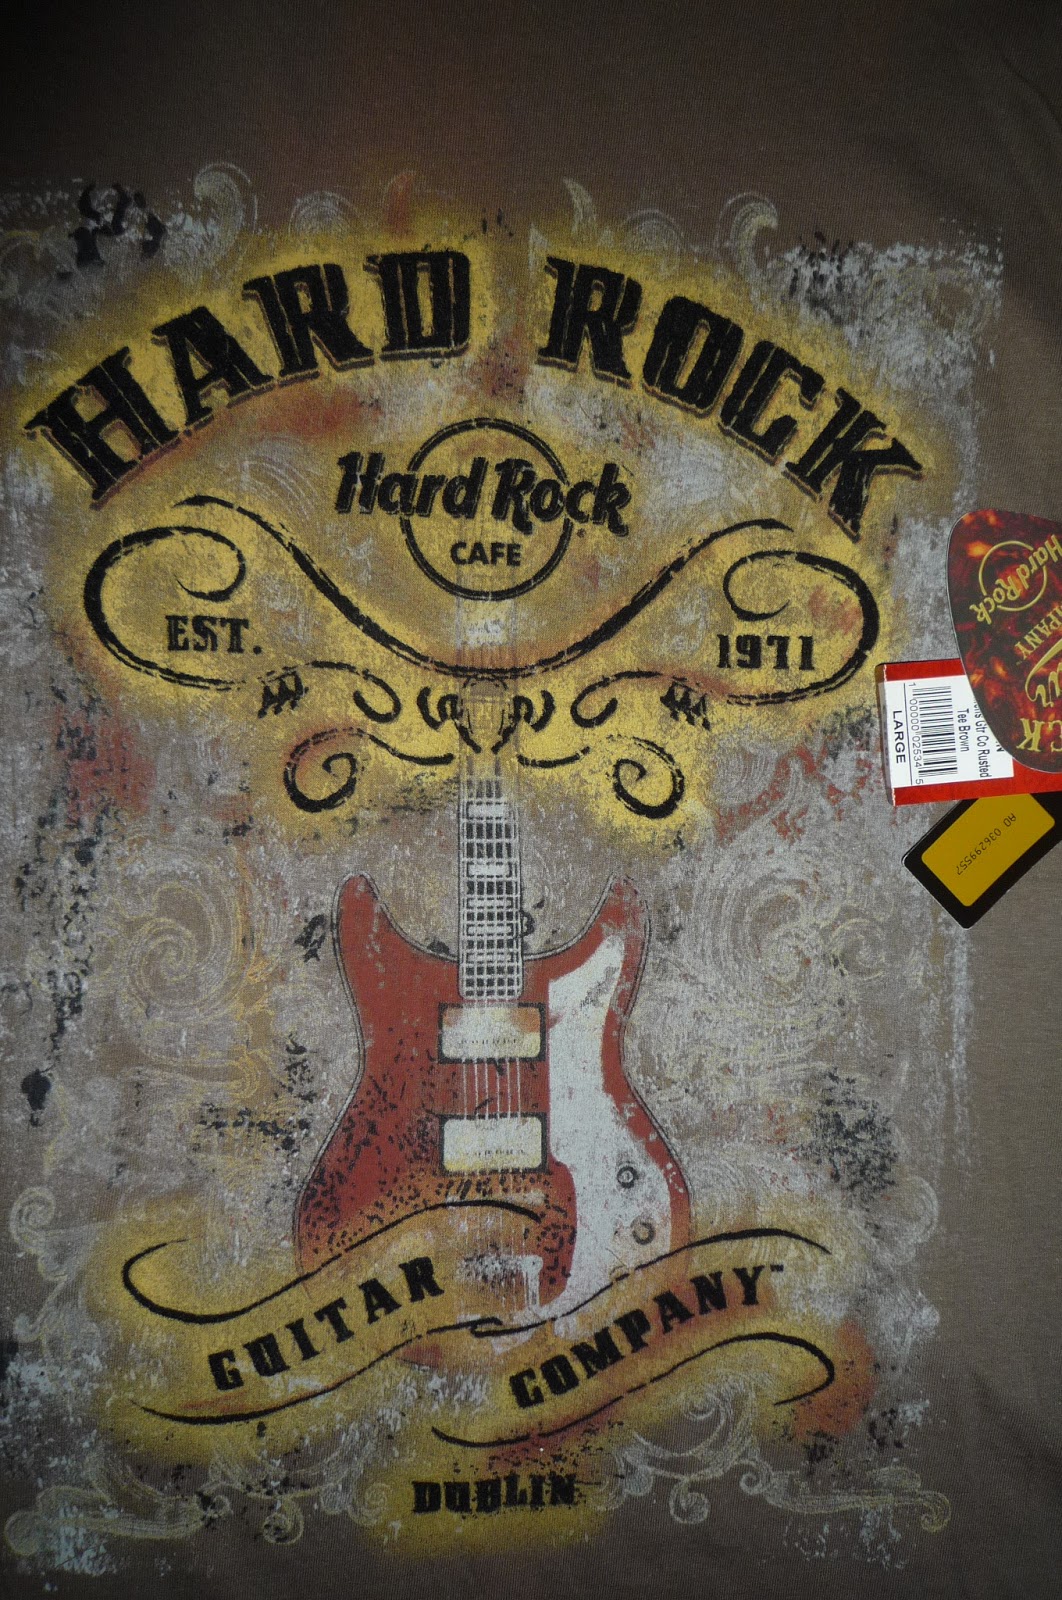 Busybeeroom Welcomes You HARD ROCK CAFE DUBLIN  T SHIRTS